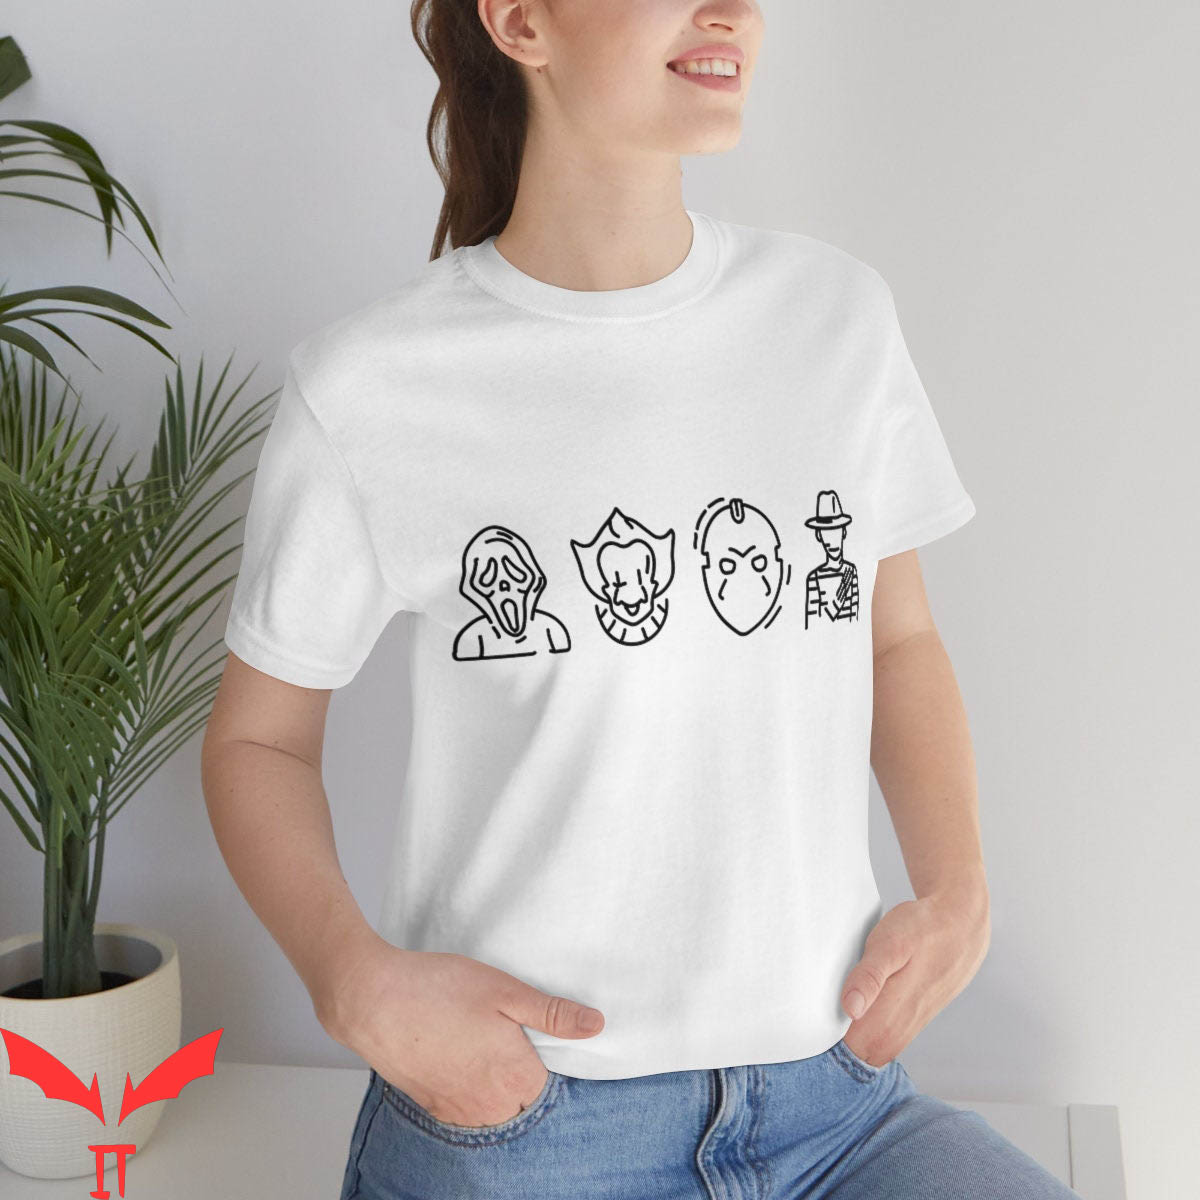 IT Pennywise T-Shirt Horror Movie Characters Scary Clown